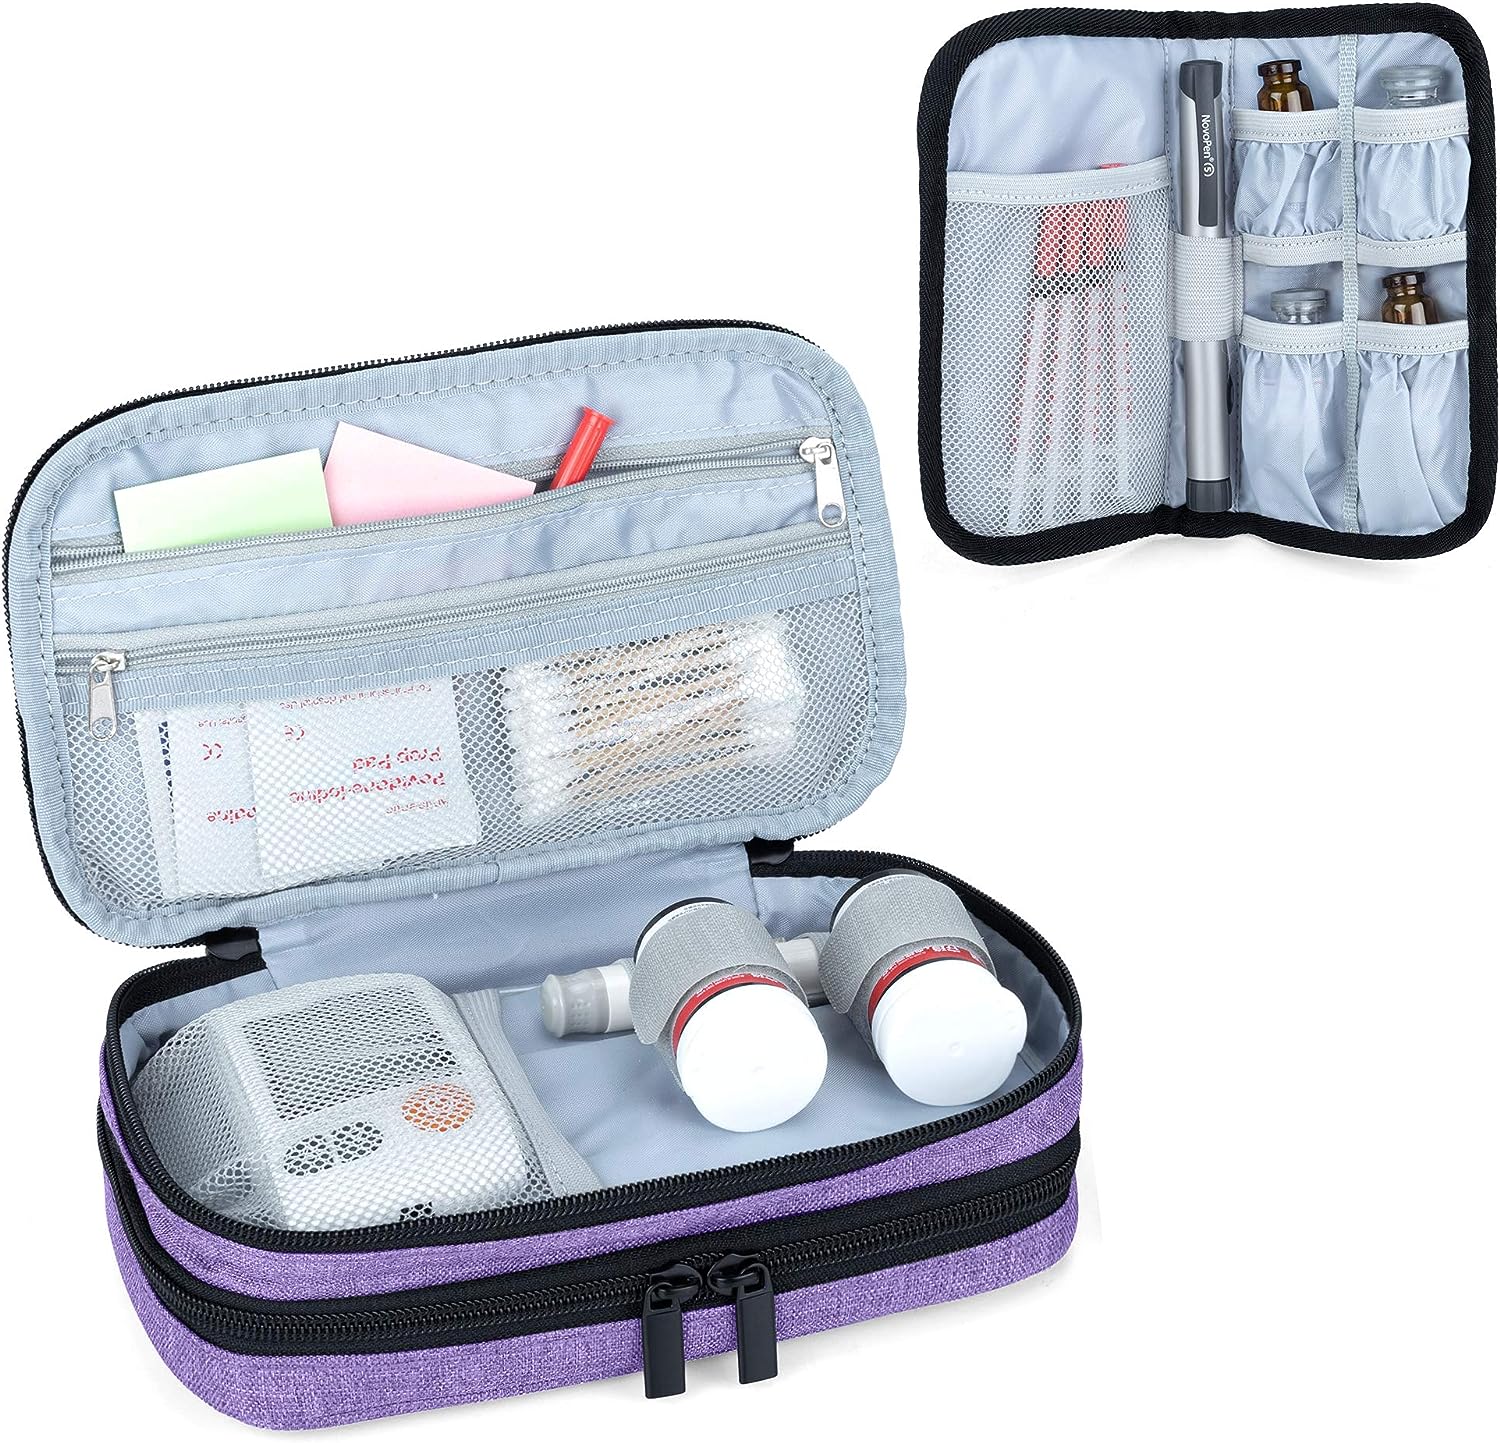 Luxja Insulin Travel Case, Double Layer Insulin Bag for Insulin Pens, Glucose Meter and other Diabetic Supplies (Bag Only), Purple